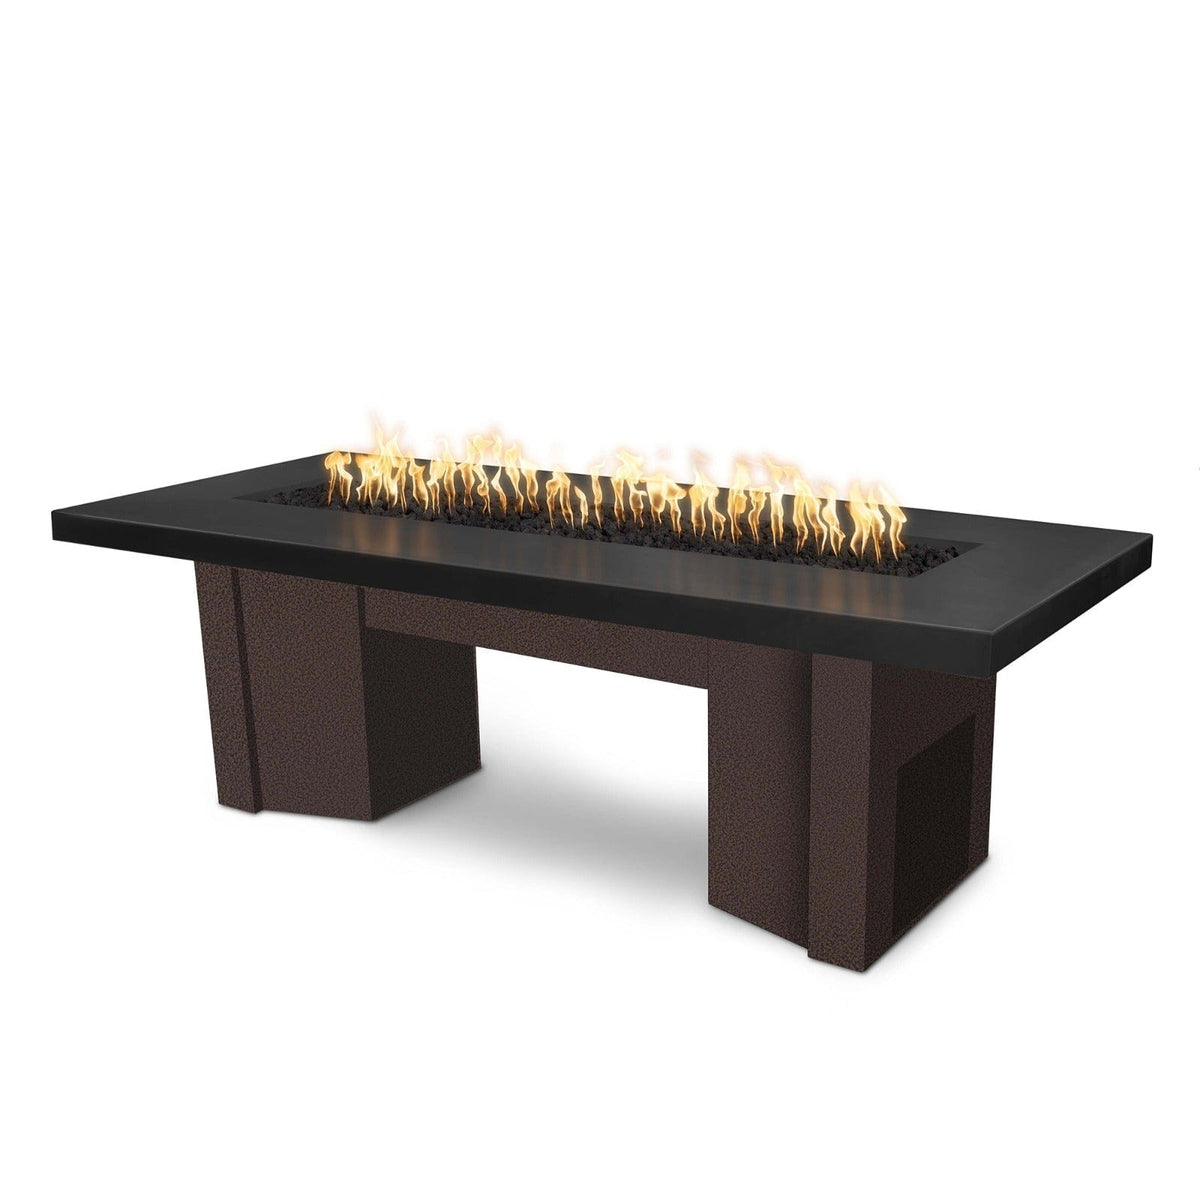 The Outdoor Plus Fire Features Black (-BLK) / Copper Vein Powder Coated Steel (-CPV) The Outdoor Plus 60&quot; Alameda Fire Table Smooth Concrete in Liquid Propane - 110V Plug &amp; Play Electronic Ignition / OPT-ALMGFRC60EKIT-LP